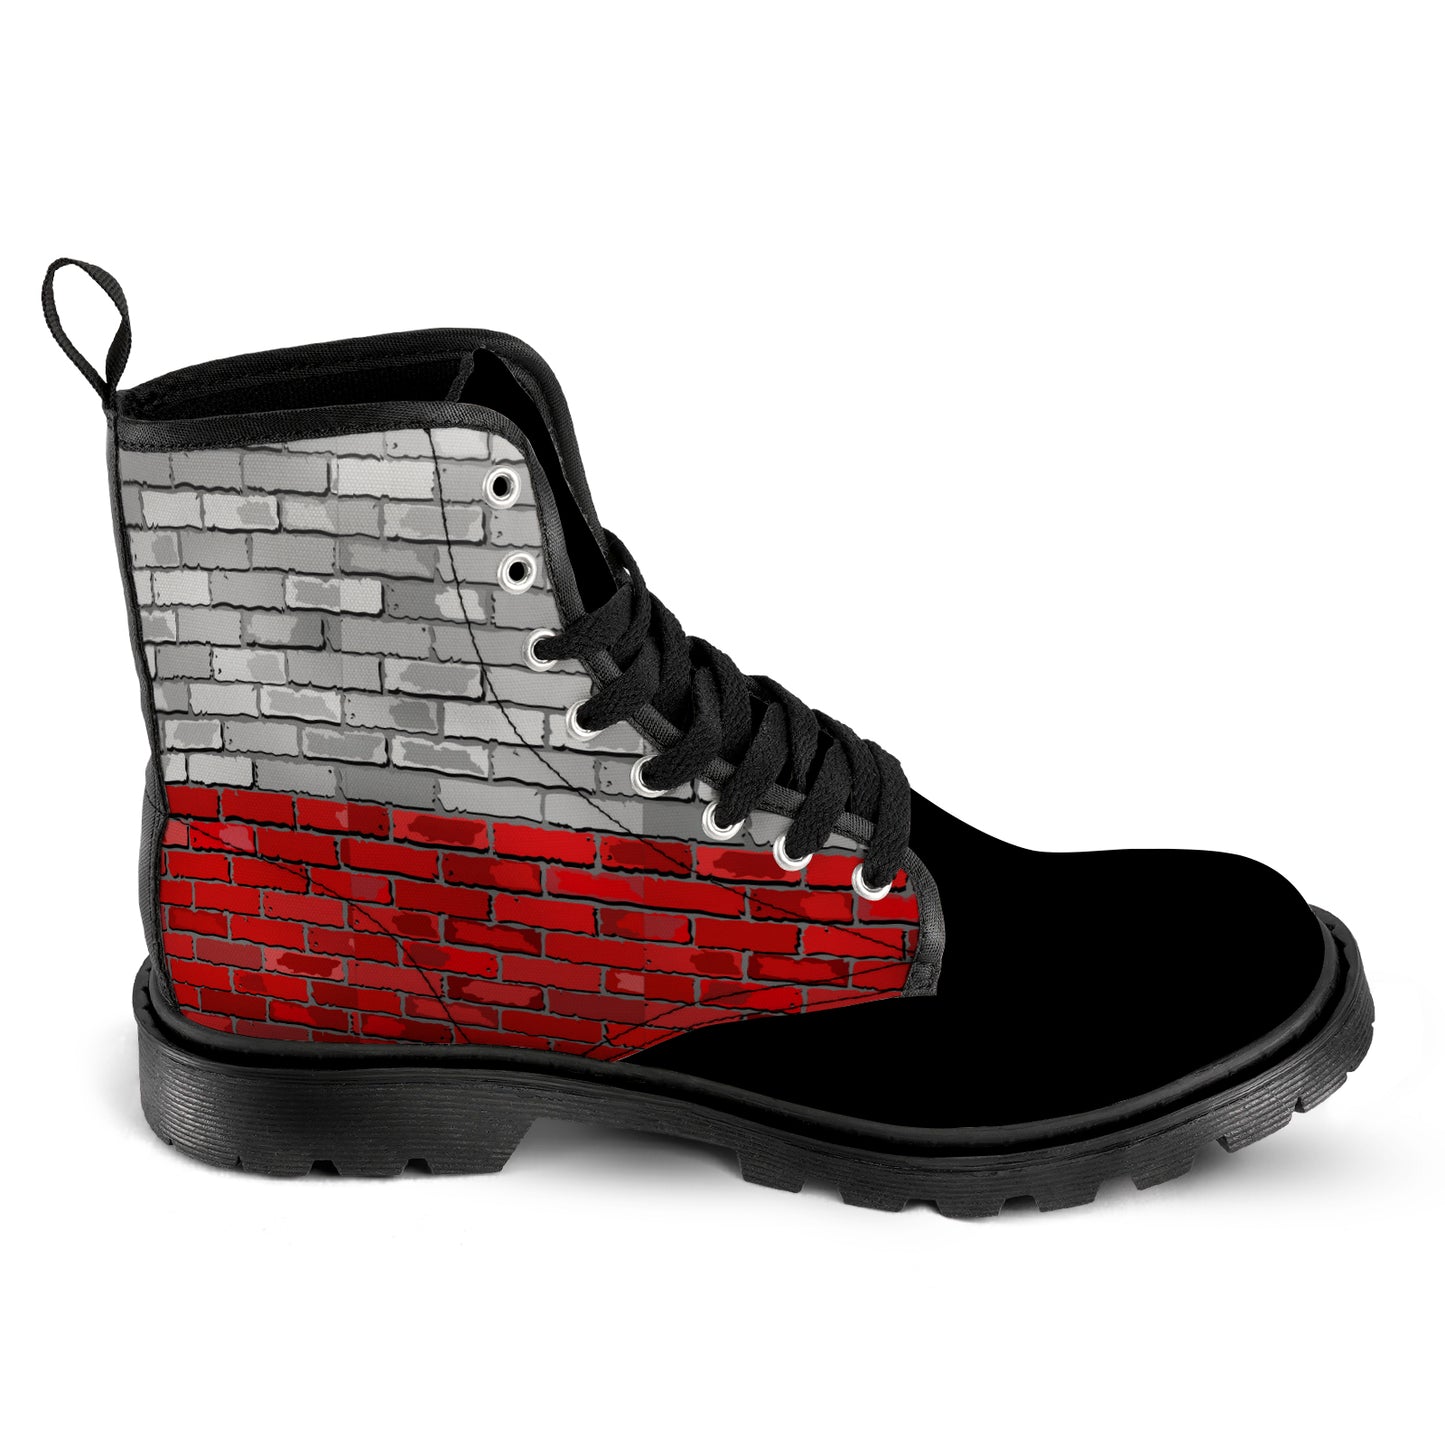 Men's Lace Up Canvas Boots - Red/Grey Brick